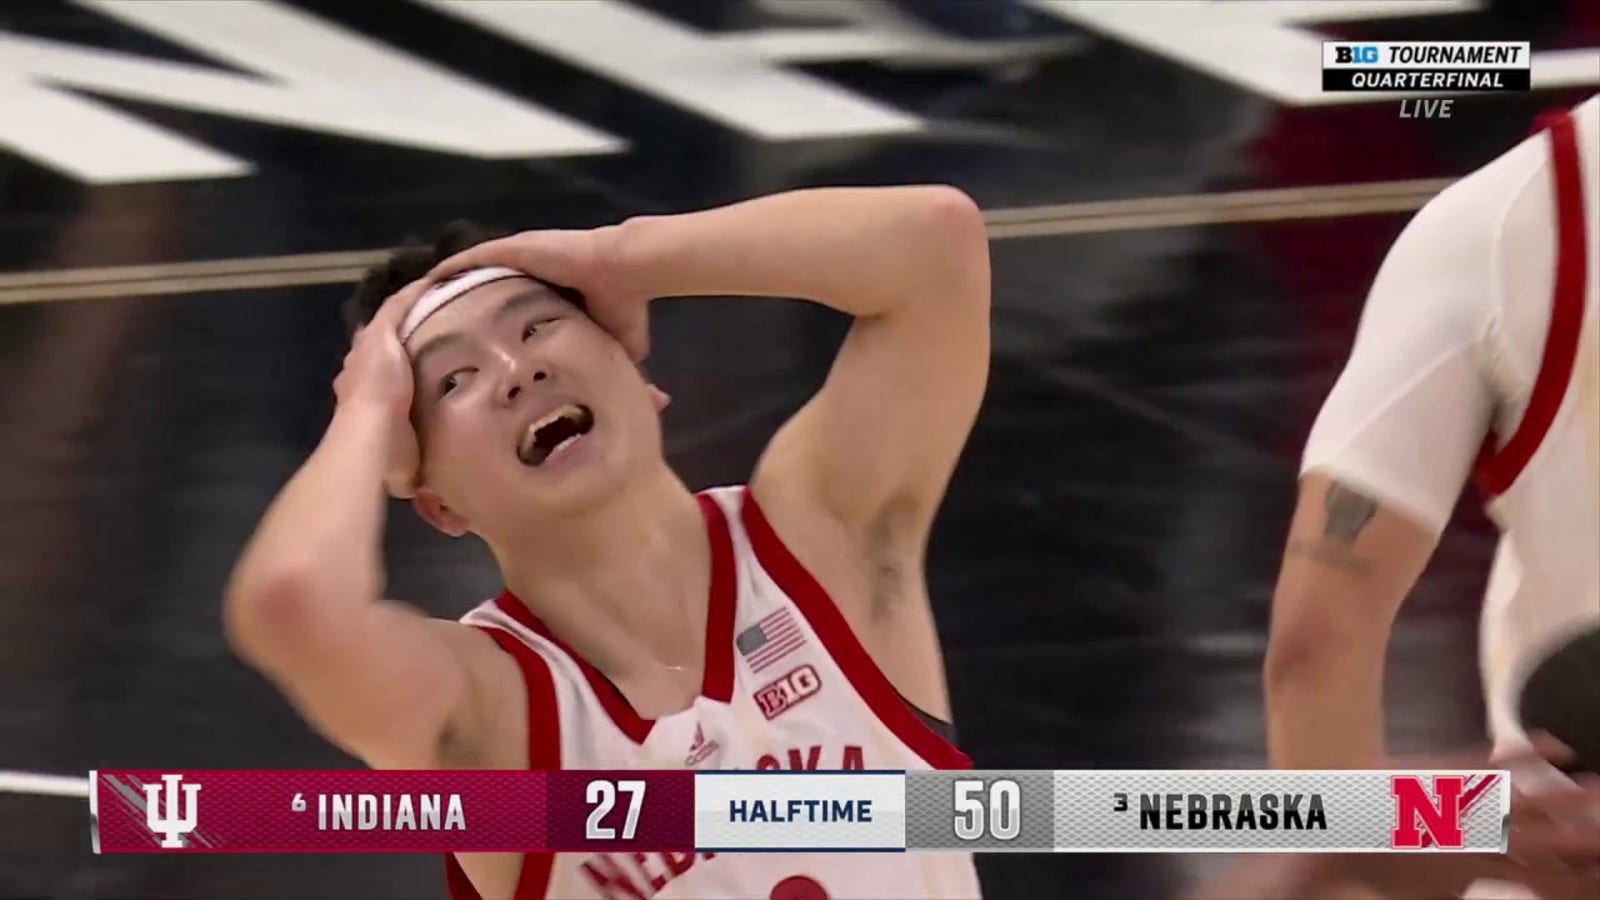 Keisei Tominaga buries a 3-pointer, capping off a 17-0 run to end the half vs. Indiana